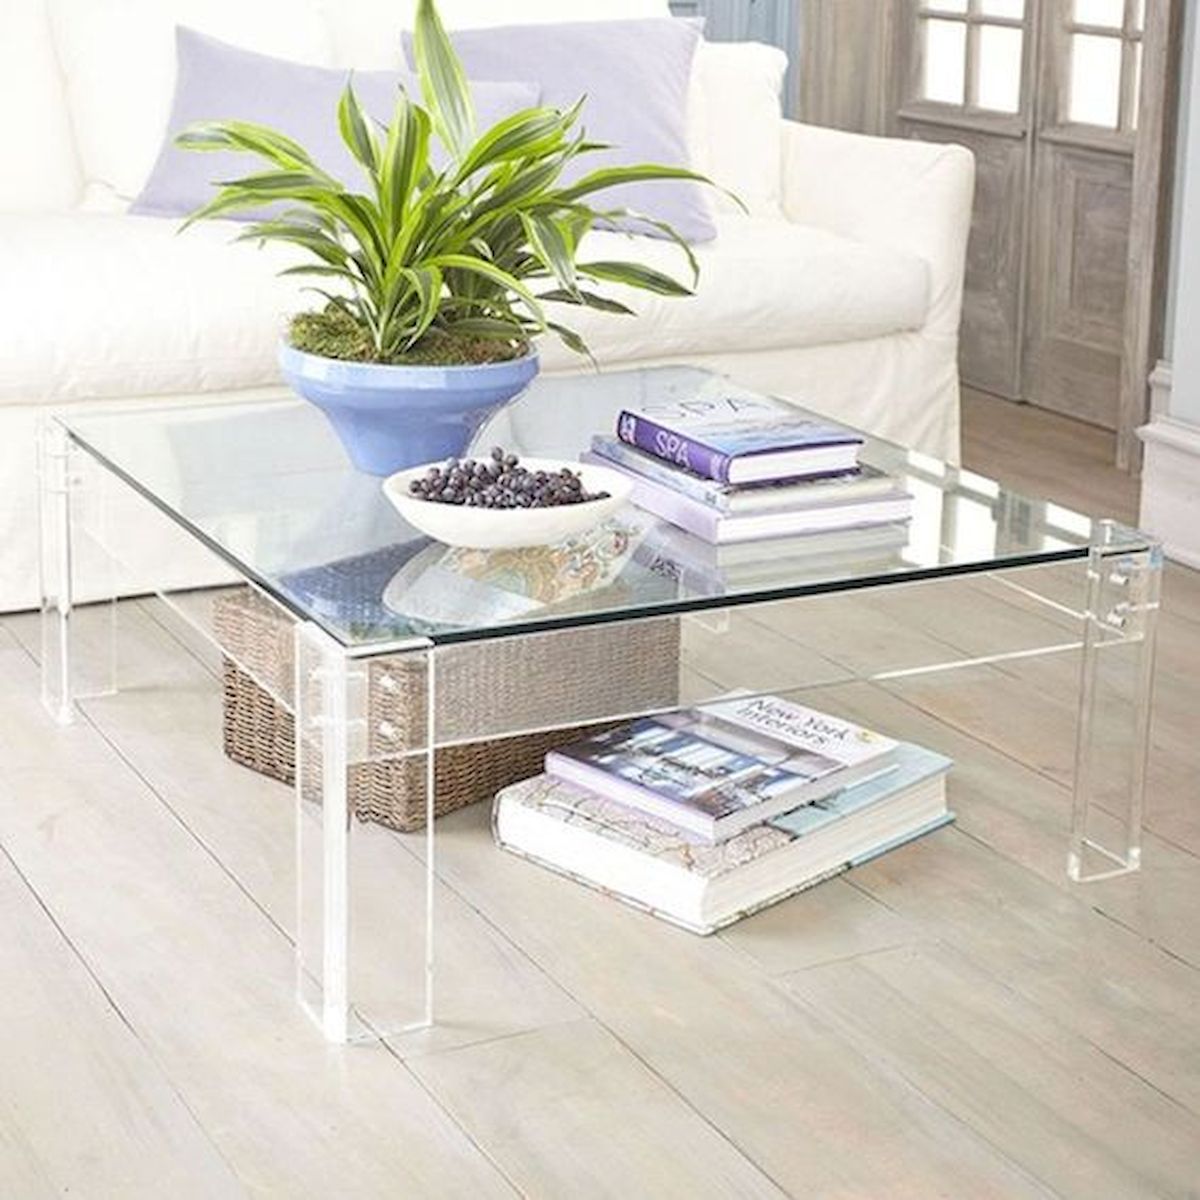 40 Awesome Modern Glass Coffee Table Design Ideas For Your Living Room (12)